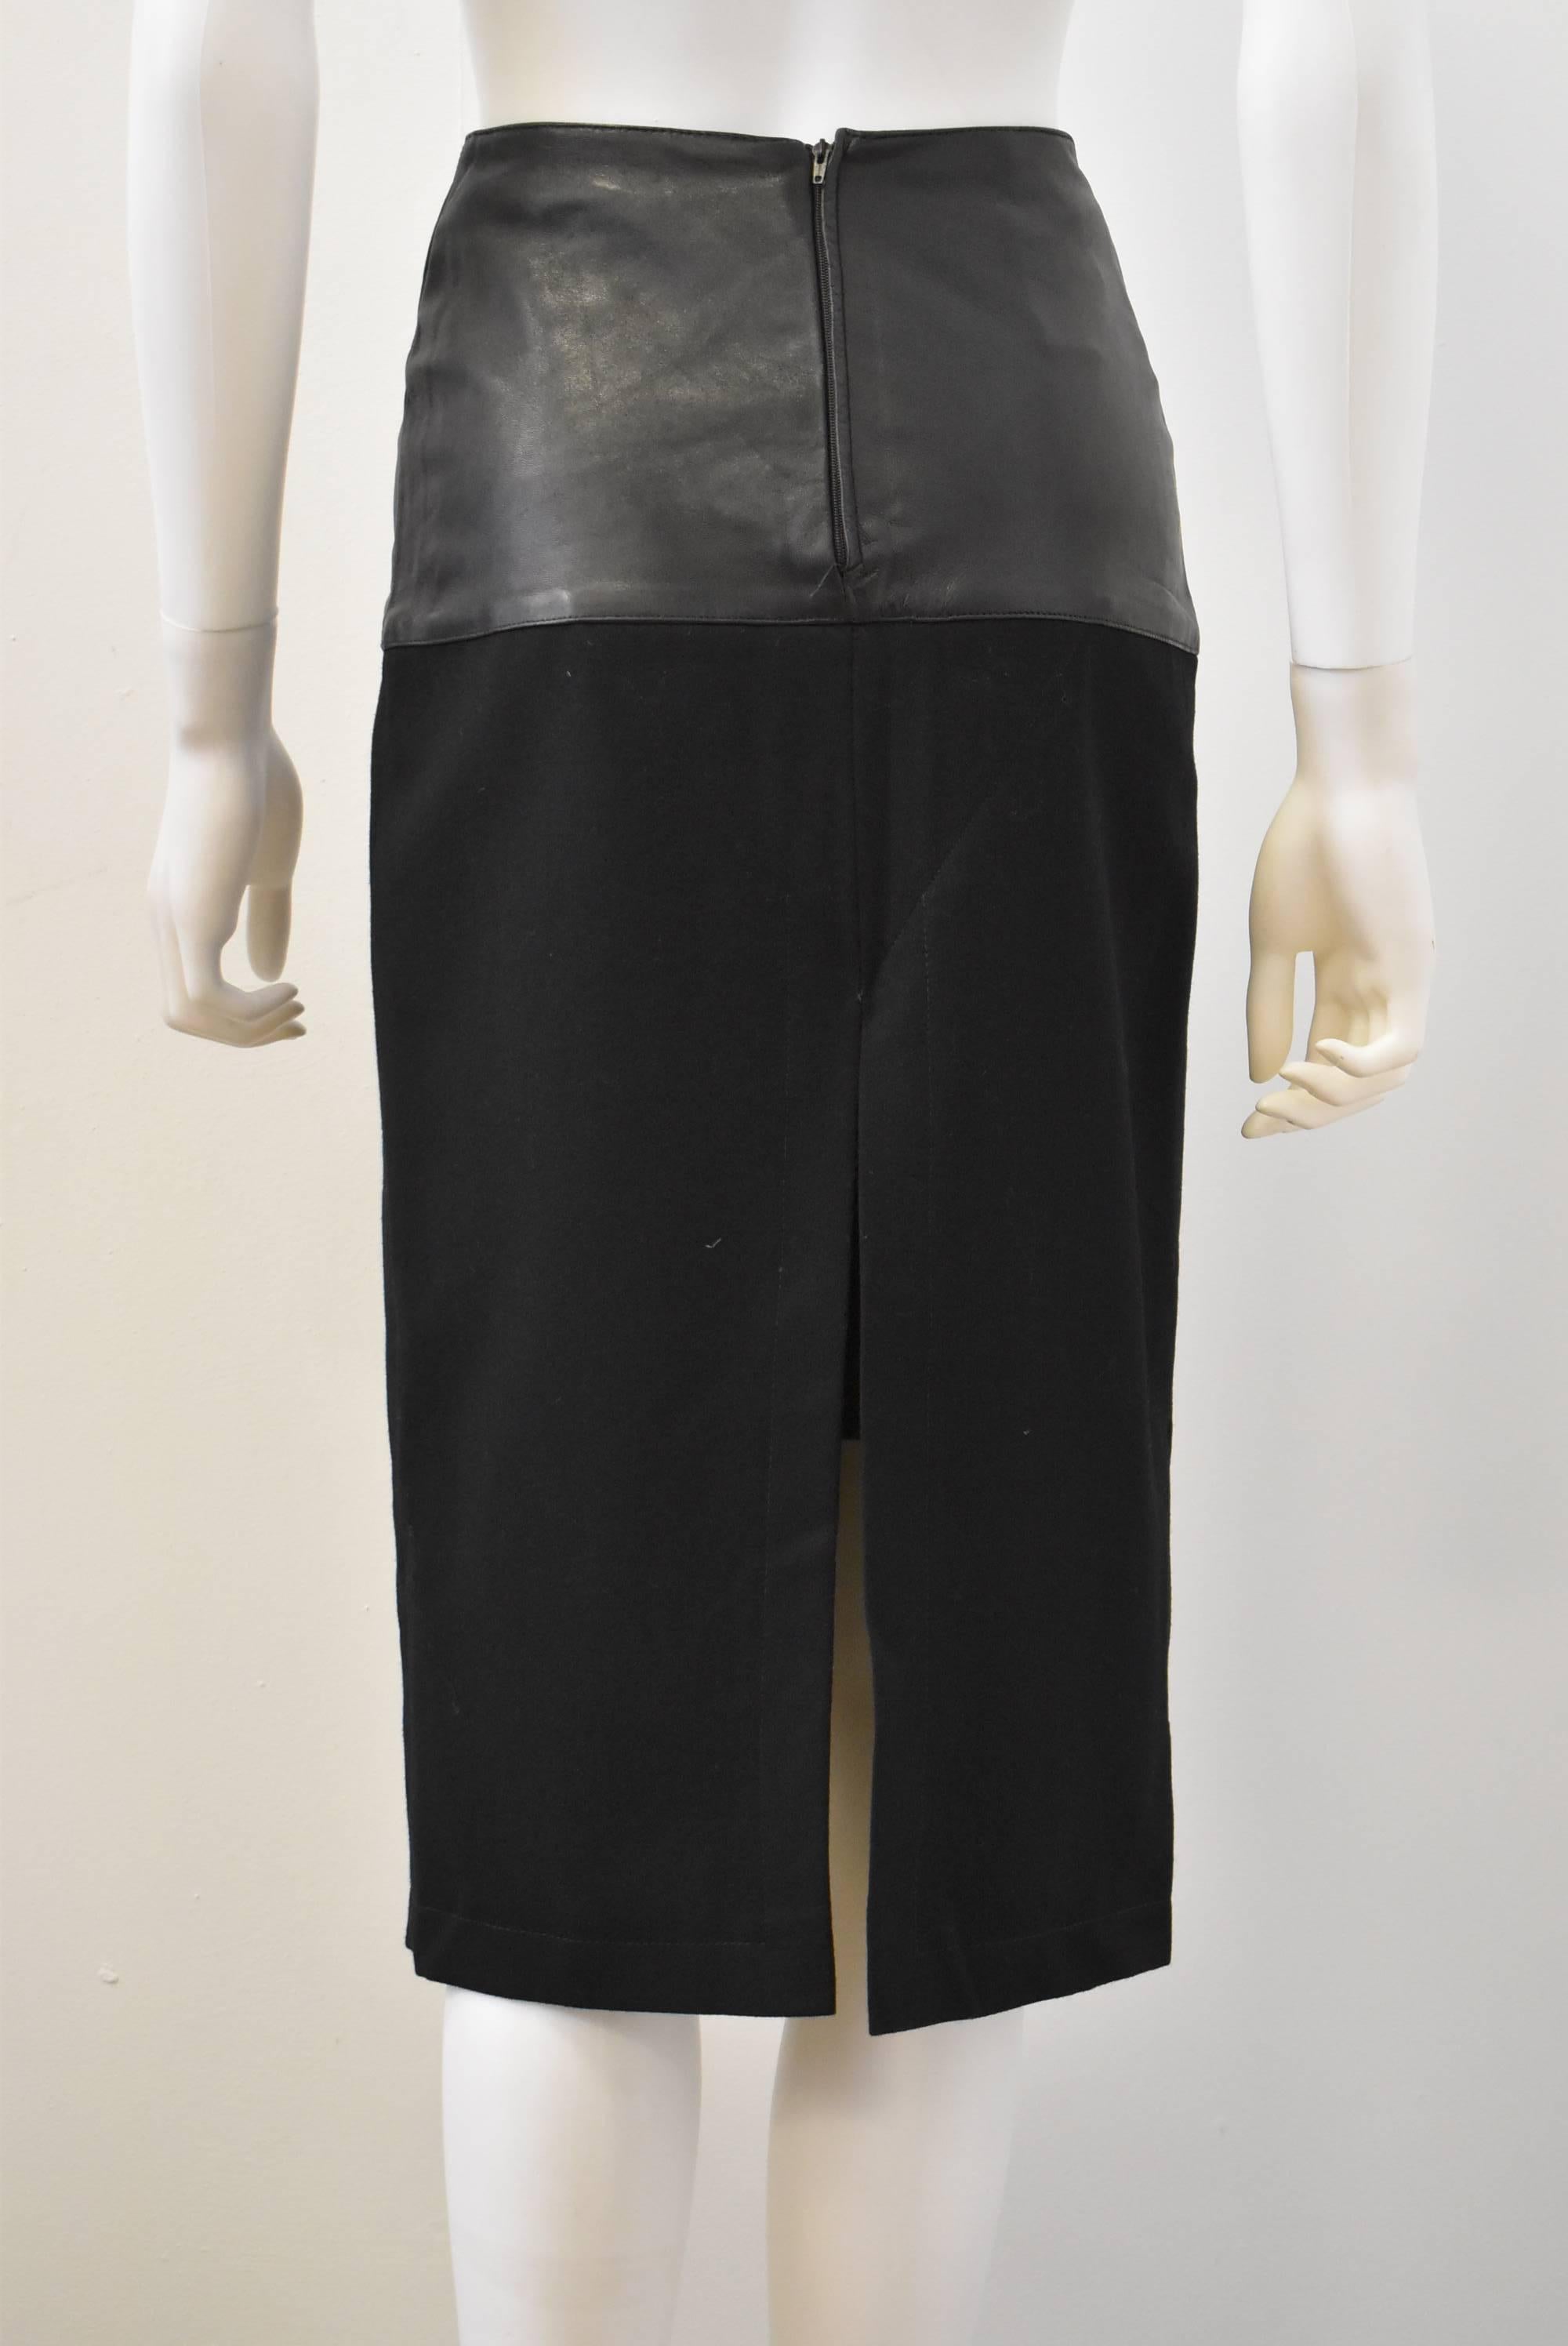 Women's 1980s Claude Montana Black Faux-Leather and Wool Skirt 